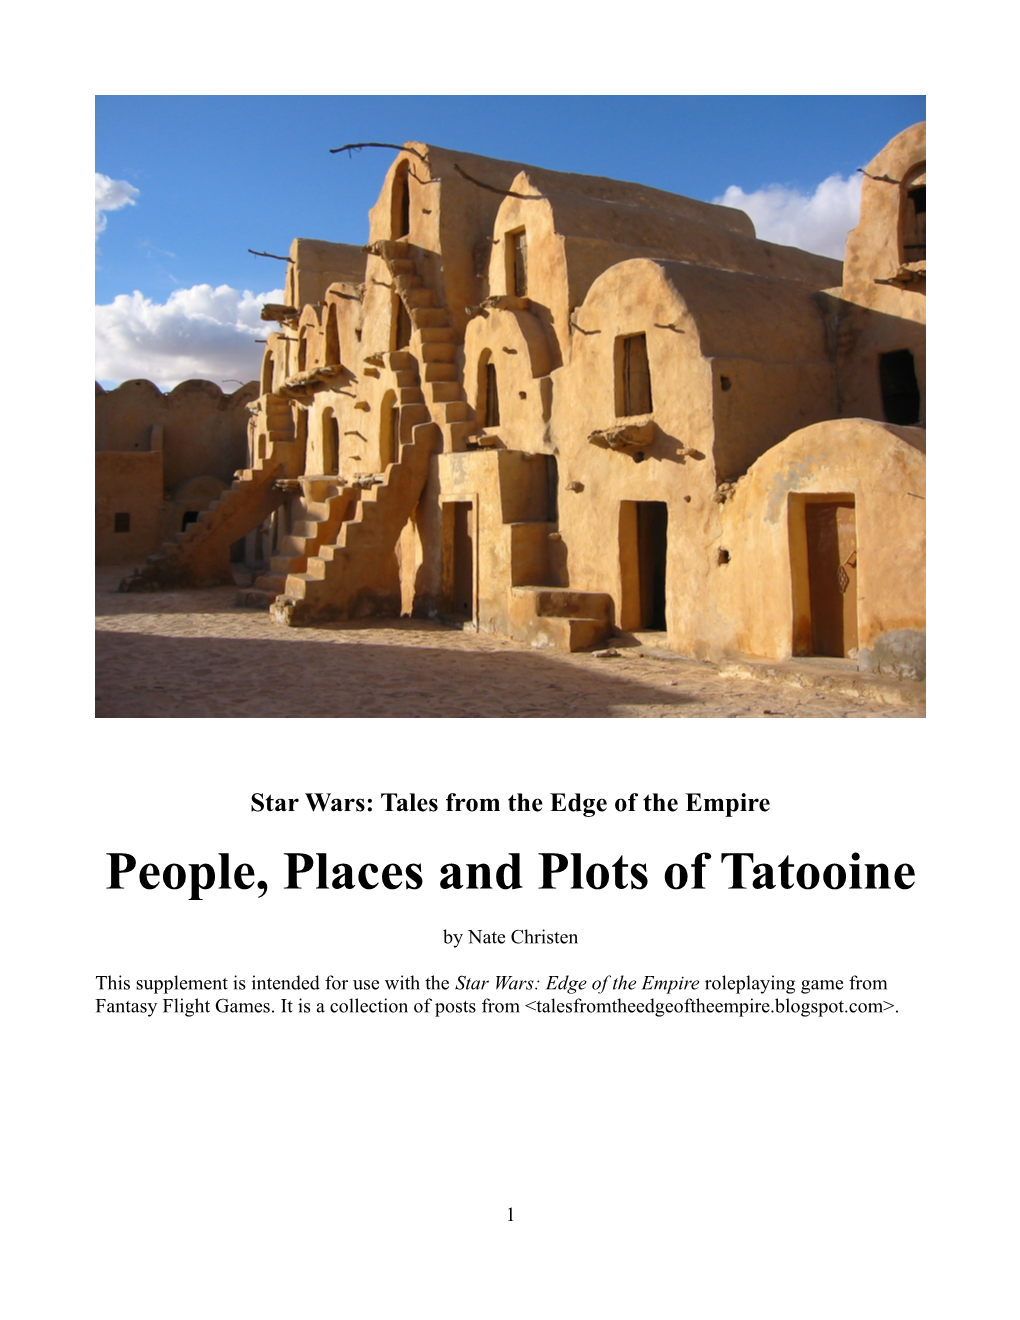 People, Places and Plots of Tatooine